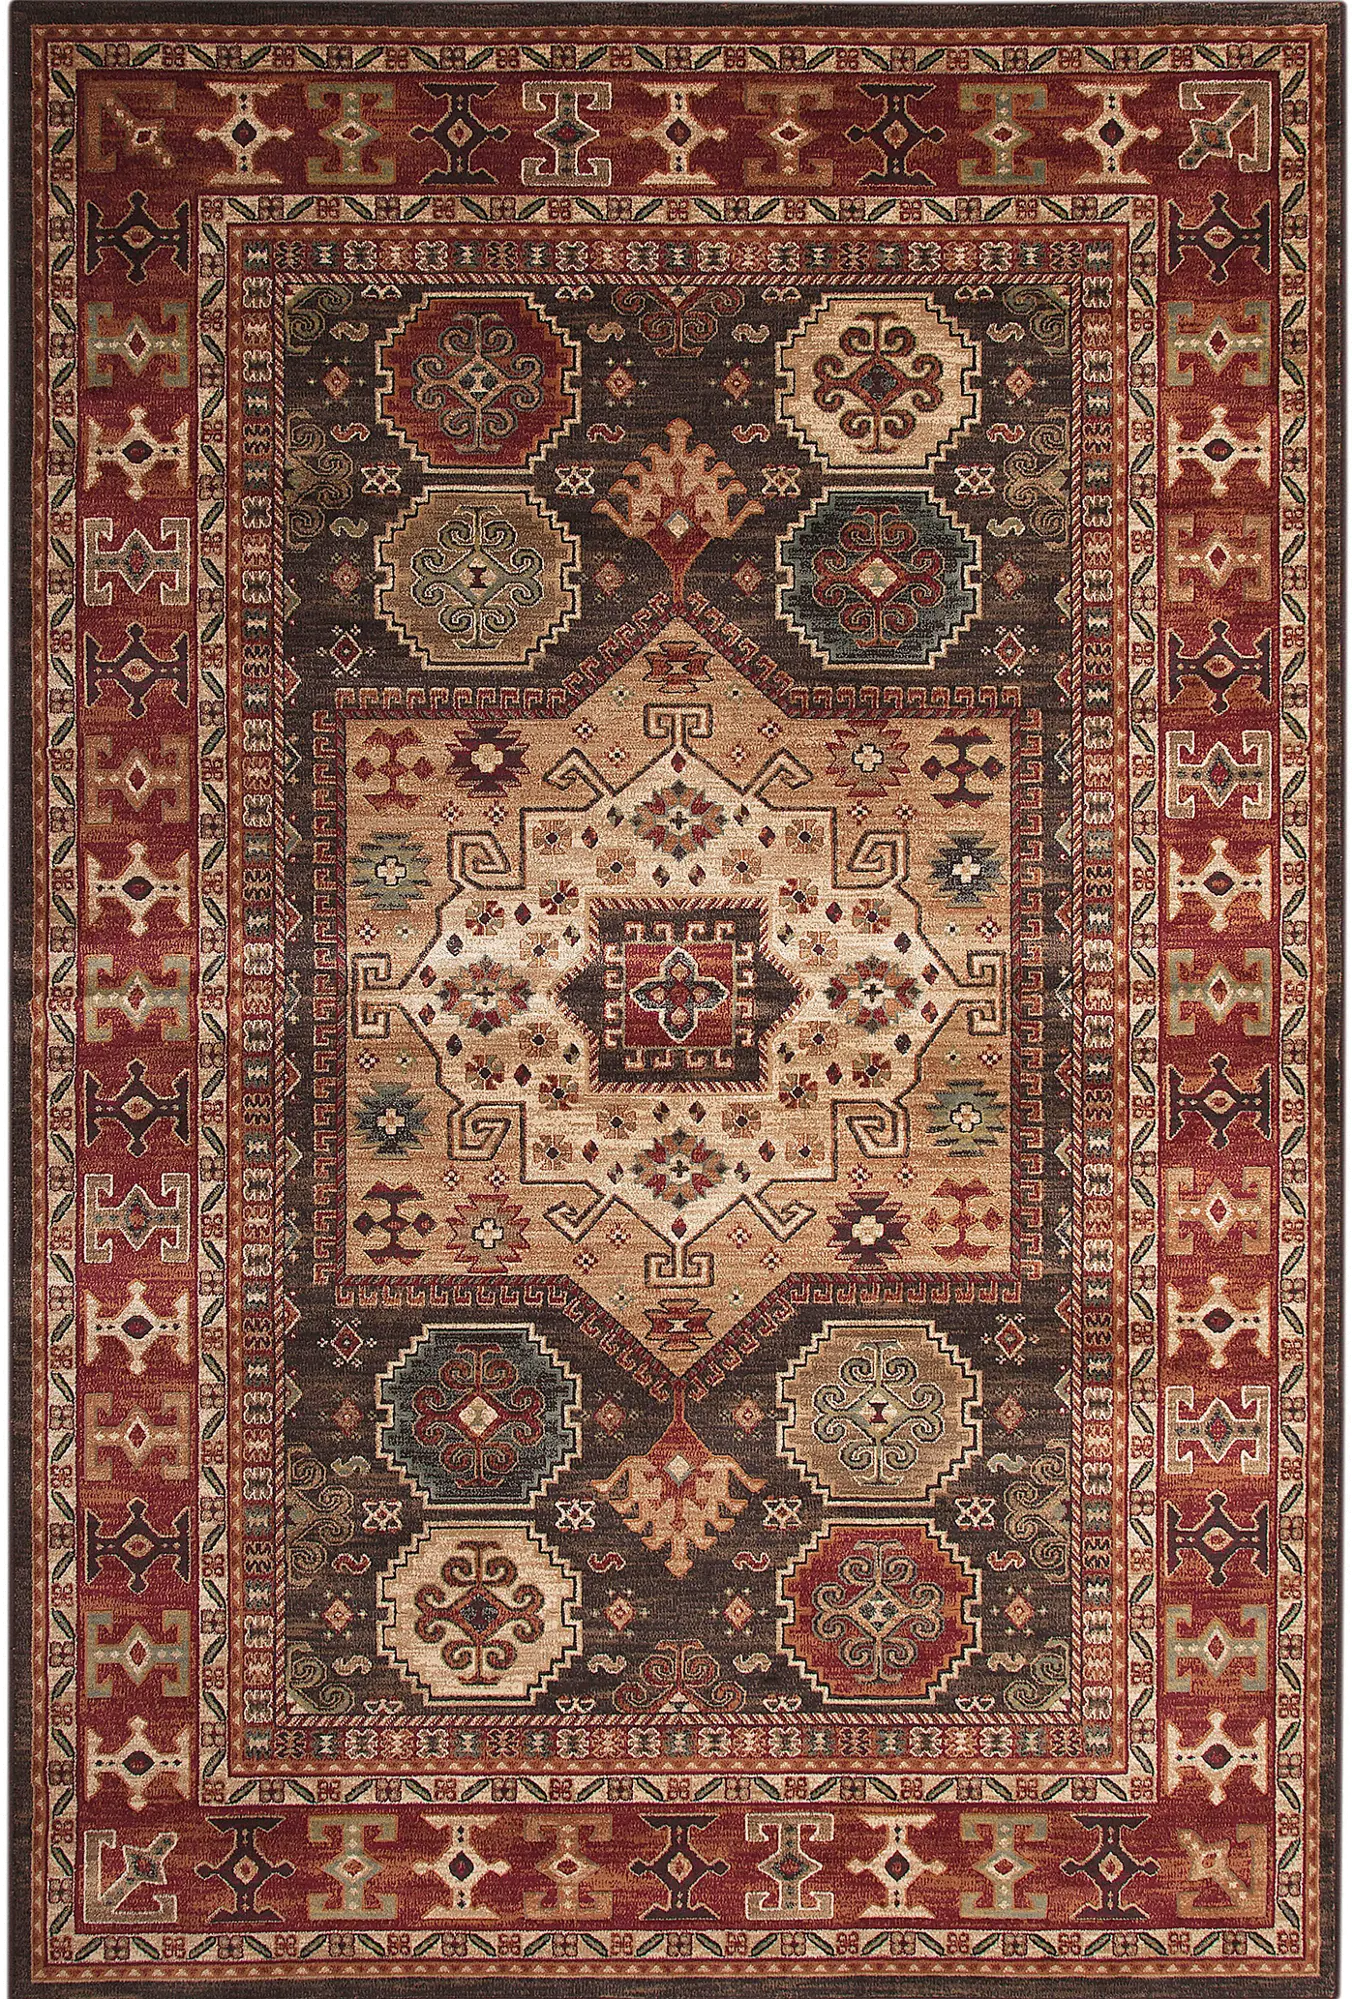 Sonoma 5 x 8 Chocolate Brown, Ivory, and Red Area Rug